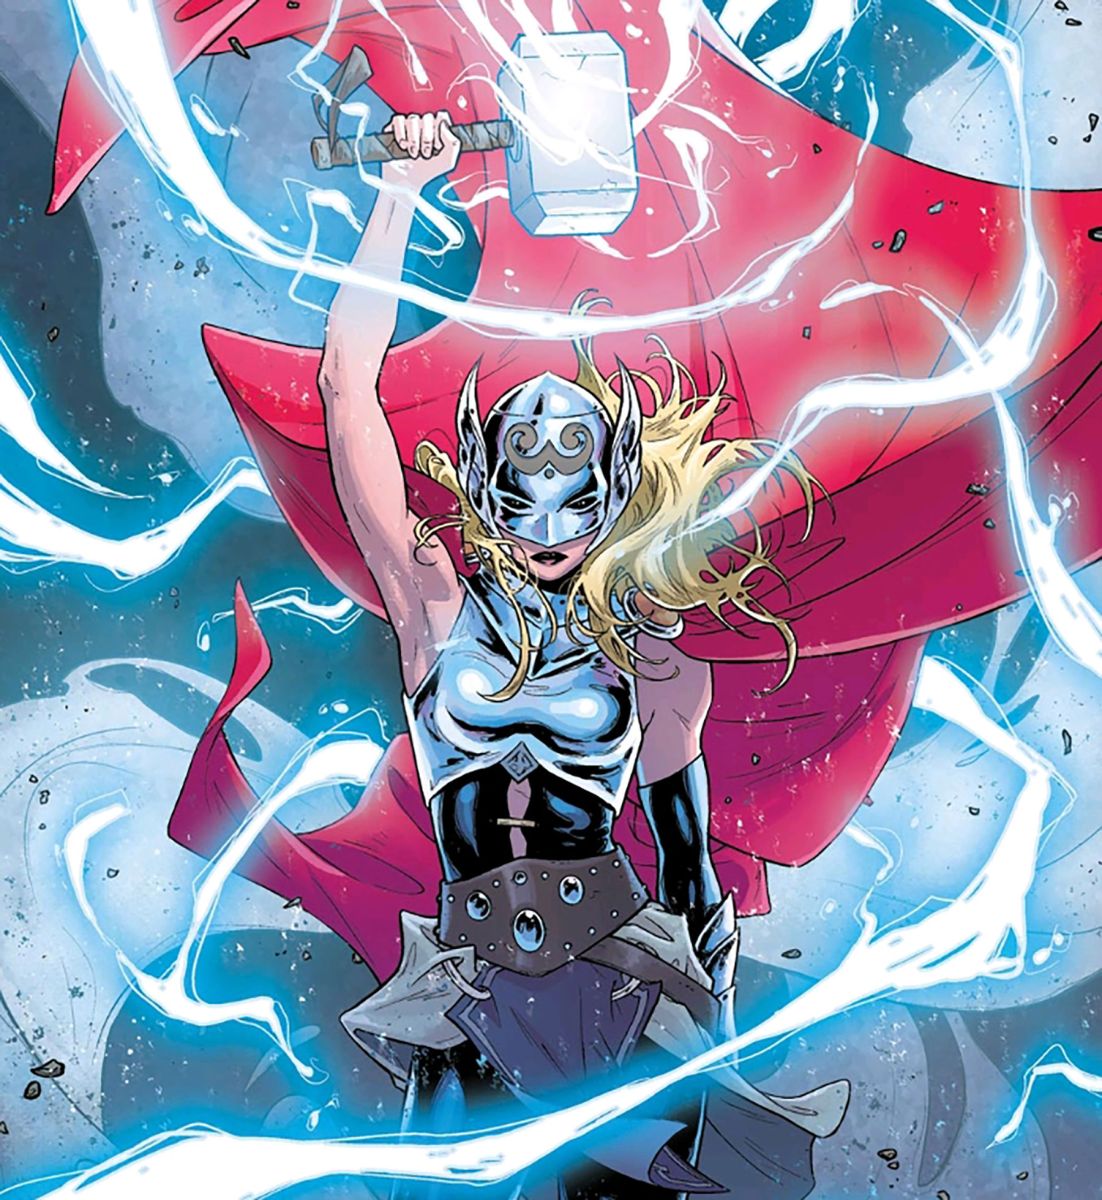 jane foster takes on the thor mantle